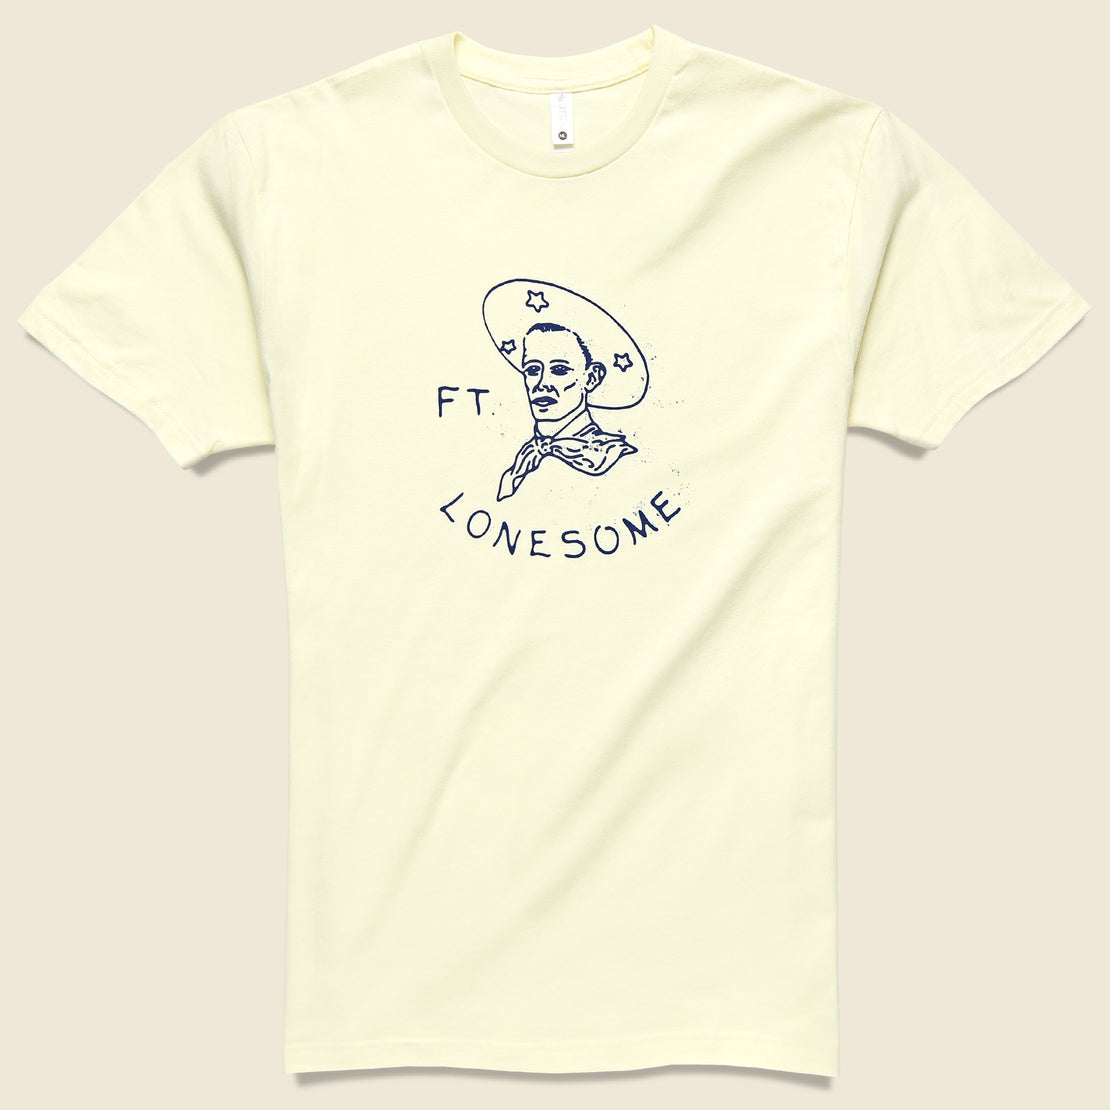 Fort Lonesome Logo Tee - Cowboy